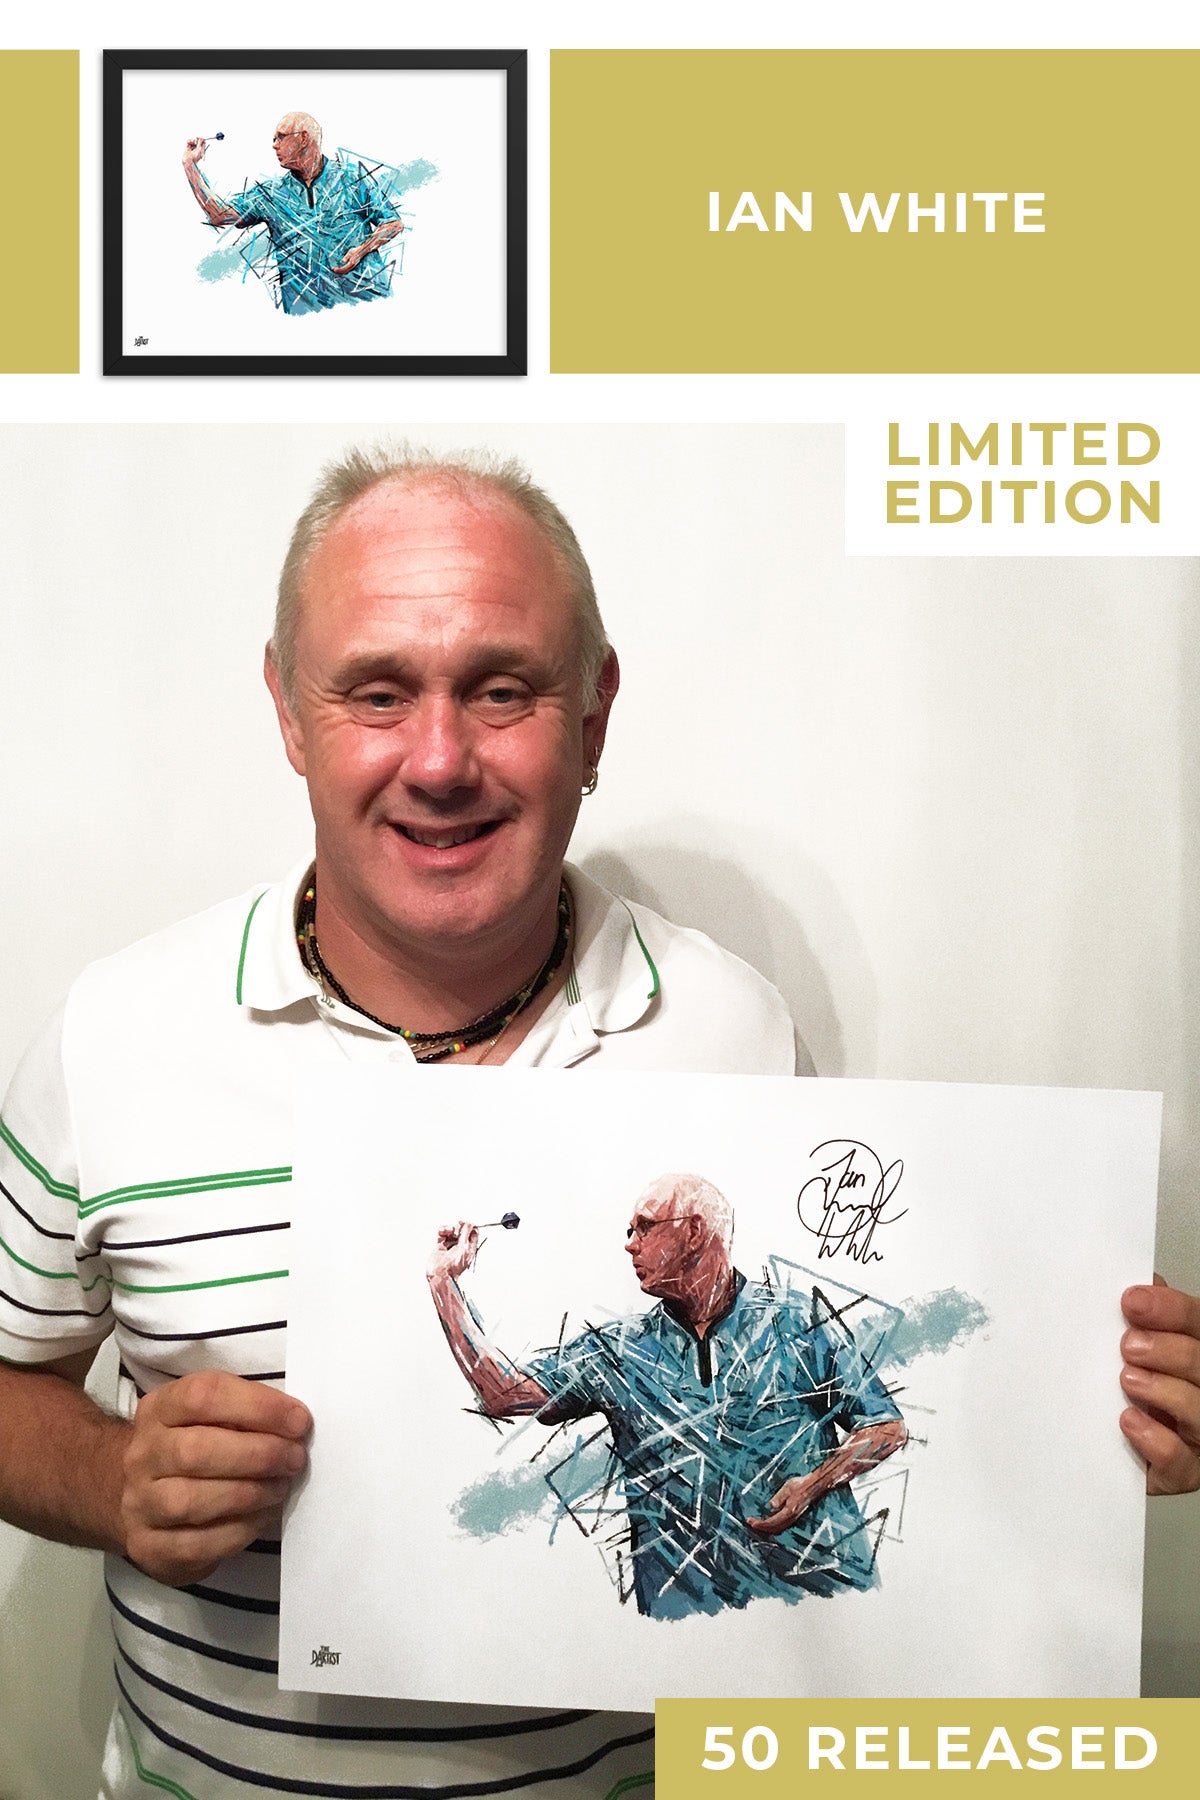 Ian White Limited Edition Signed Art Print - The Dartist